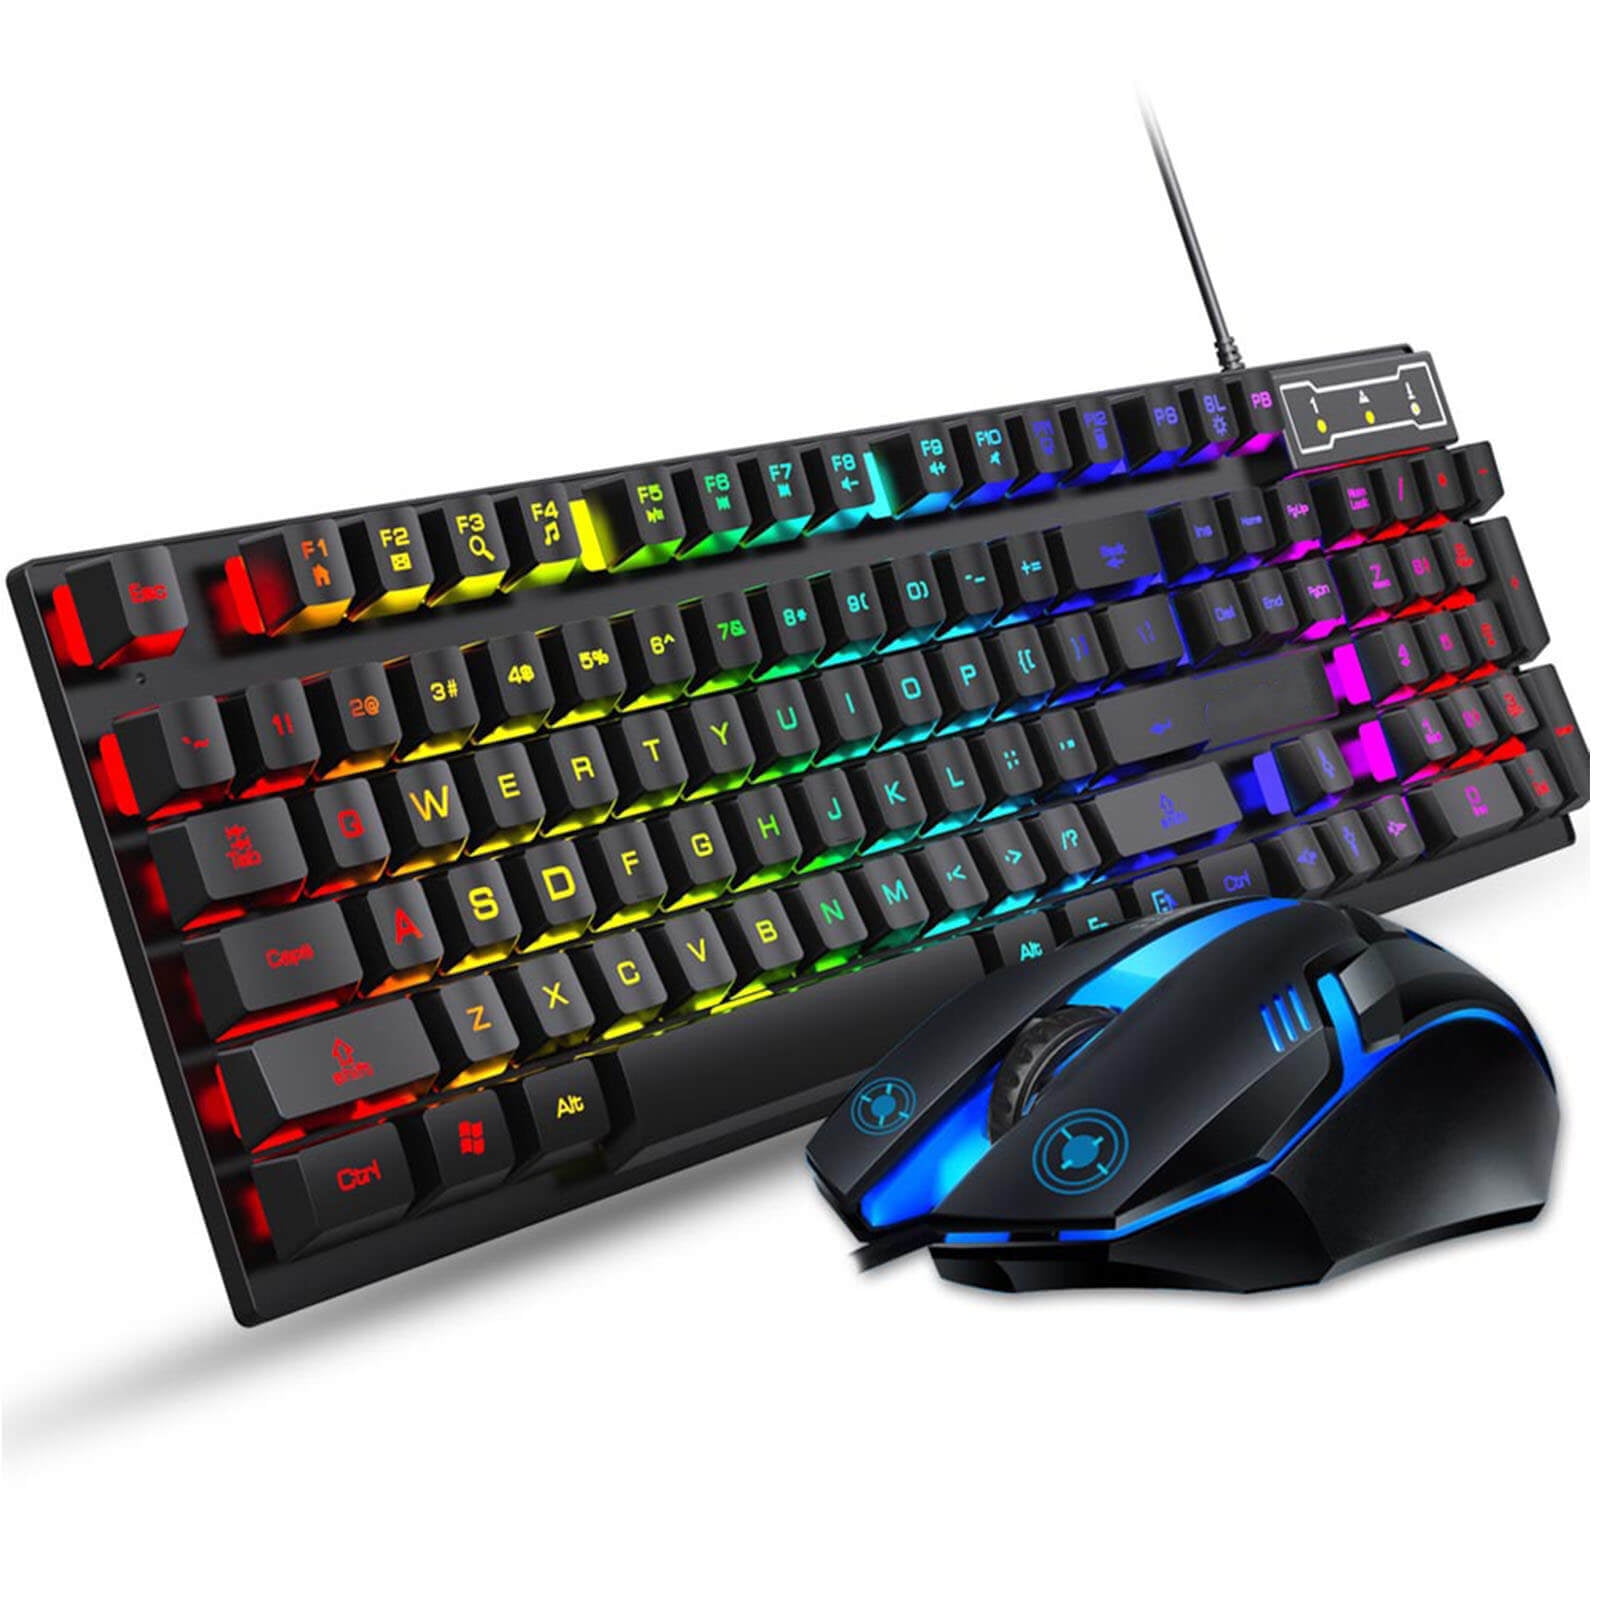 Keyboard and Mouse Set Combo, Wired RGB Backlit Computer Keyboard with